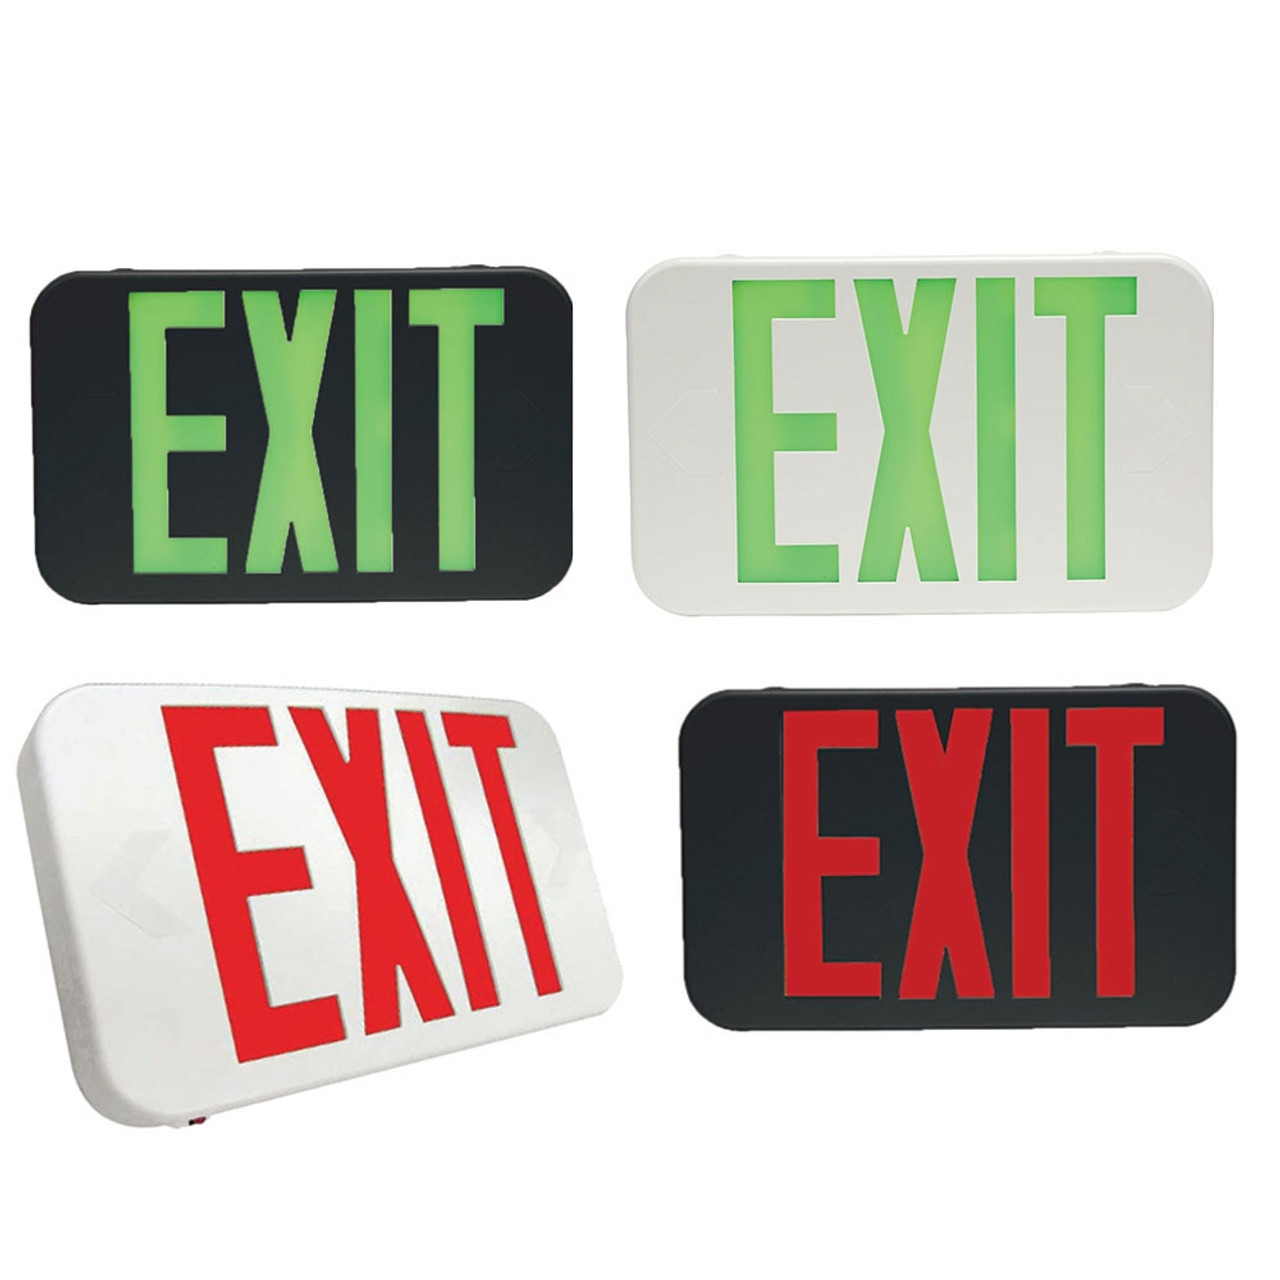 LED Plastic Exit Sign With Battery Back Up Choose White or Black Housing  Color with Red or Green Lettering